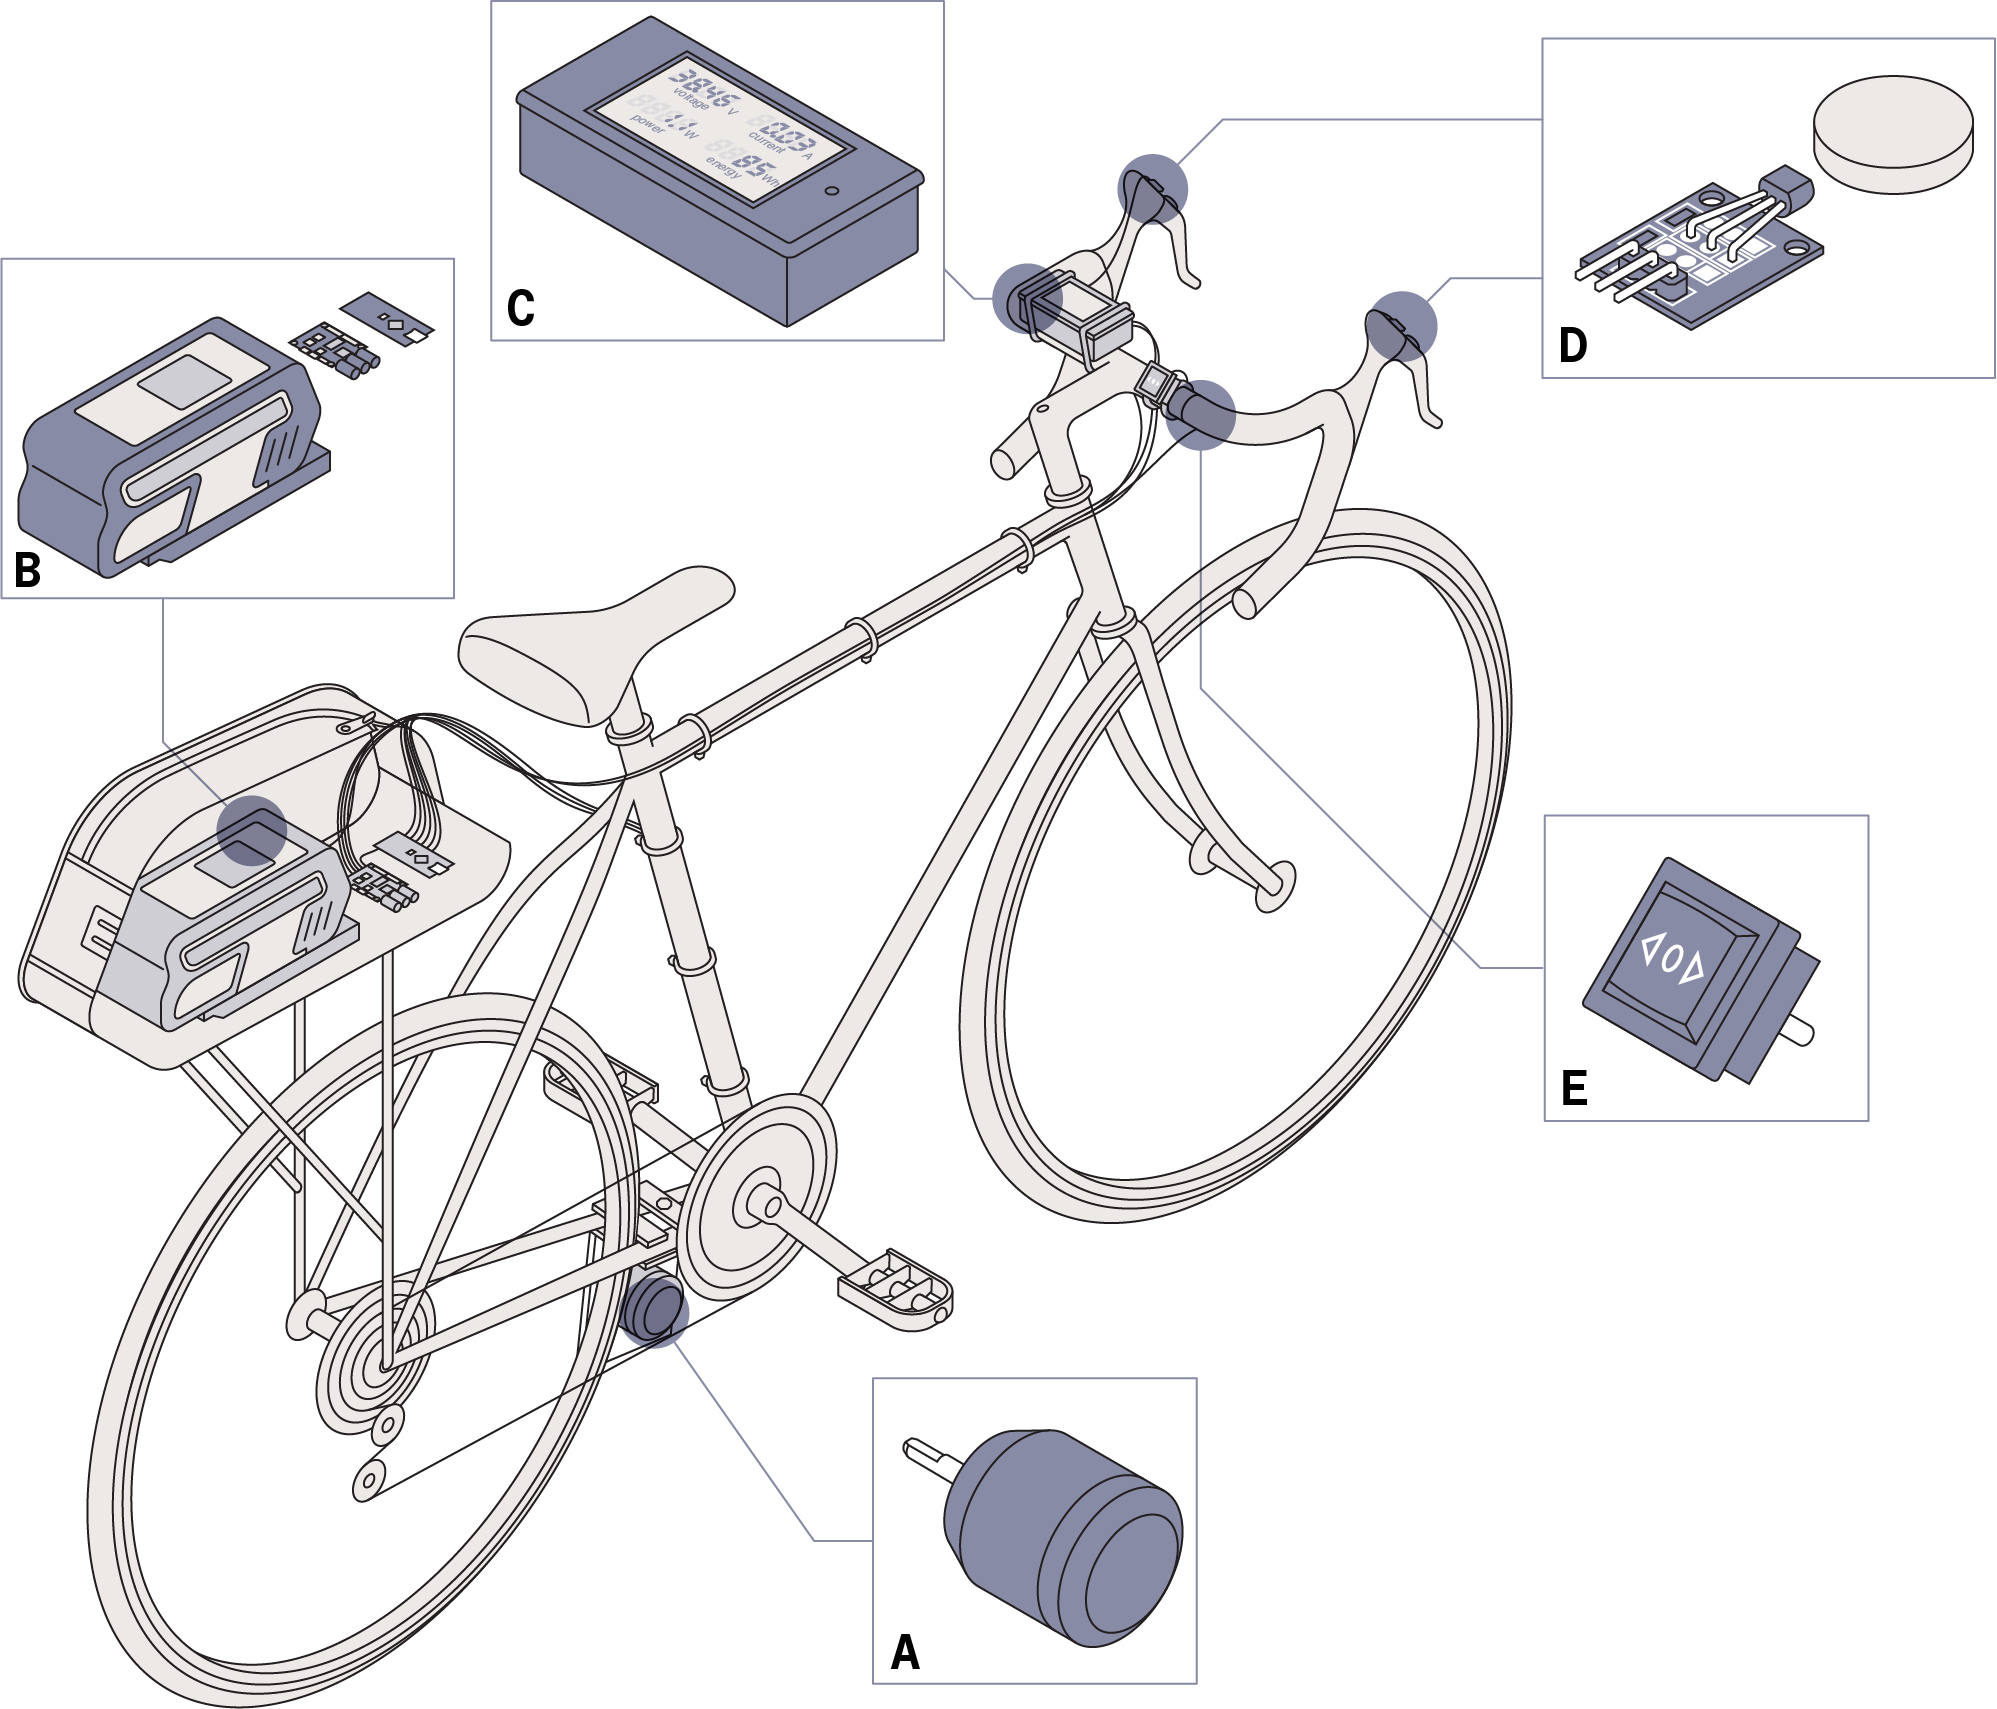 Blueprint of the simple electric bike conversion.